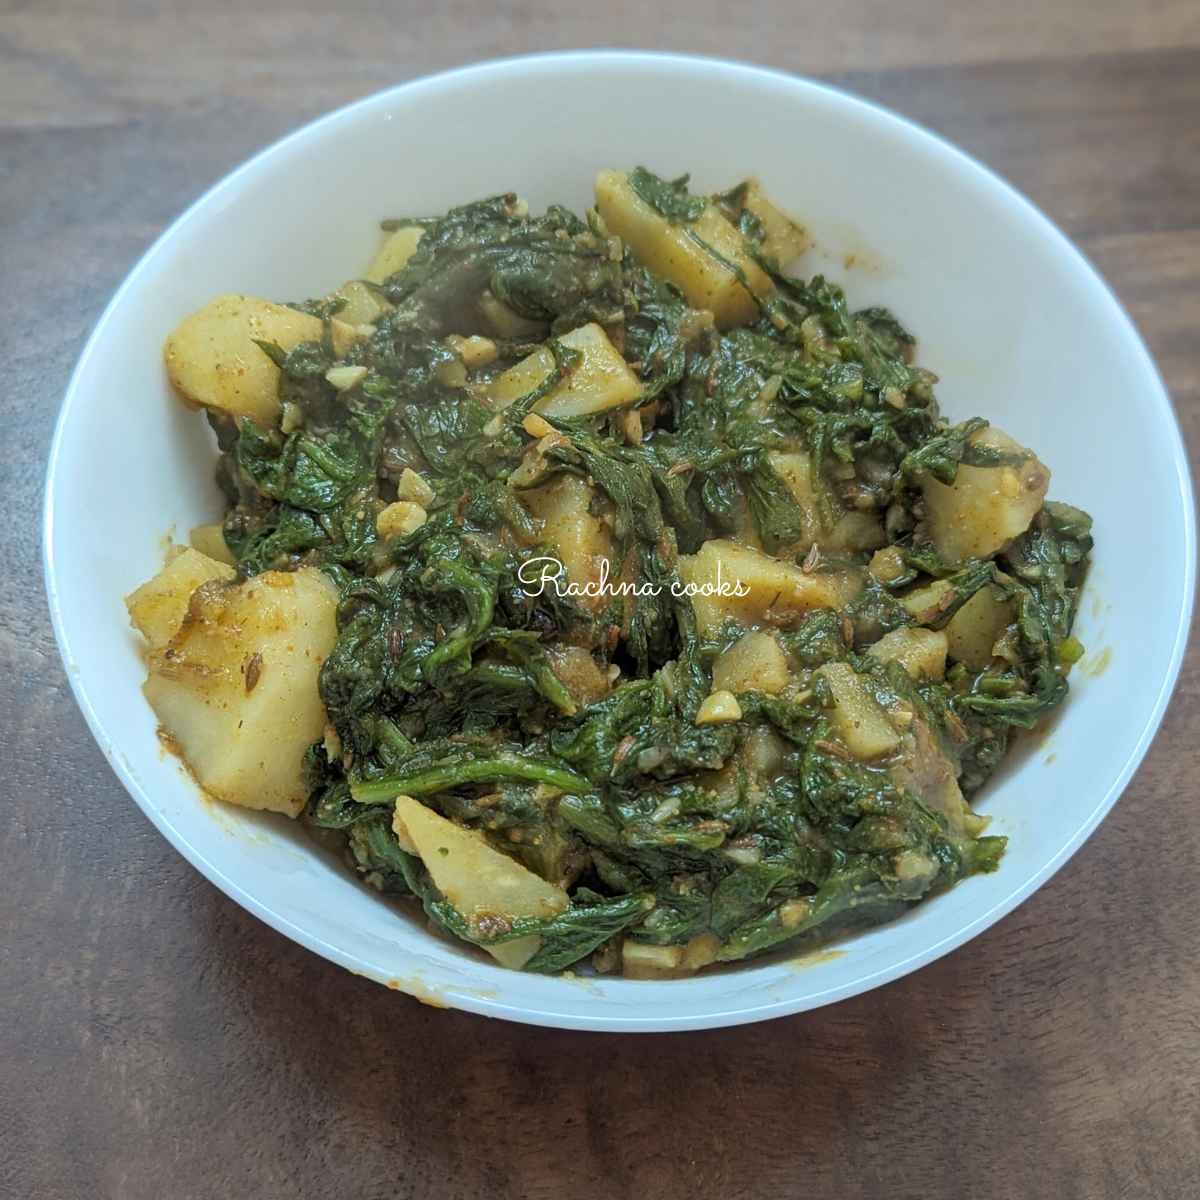 Delicious aloo palak served in a bowl.